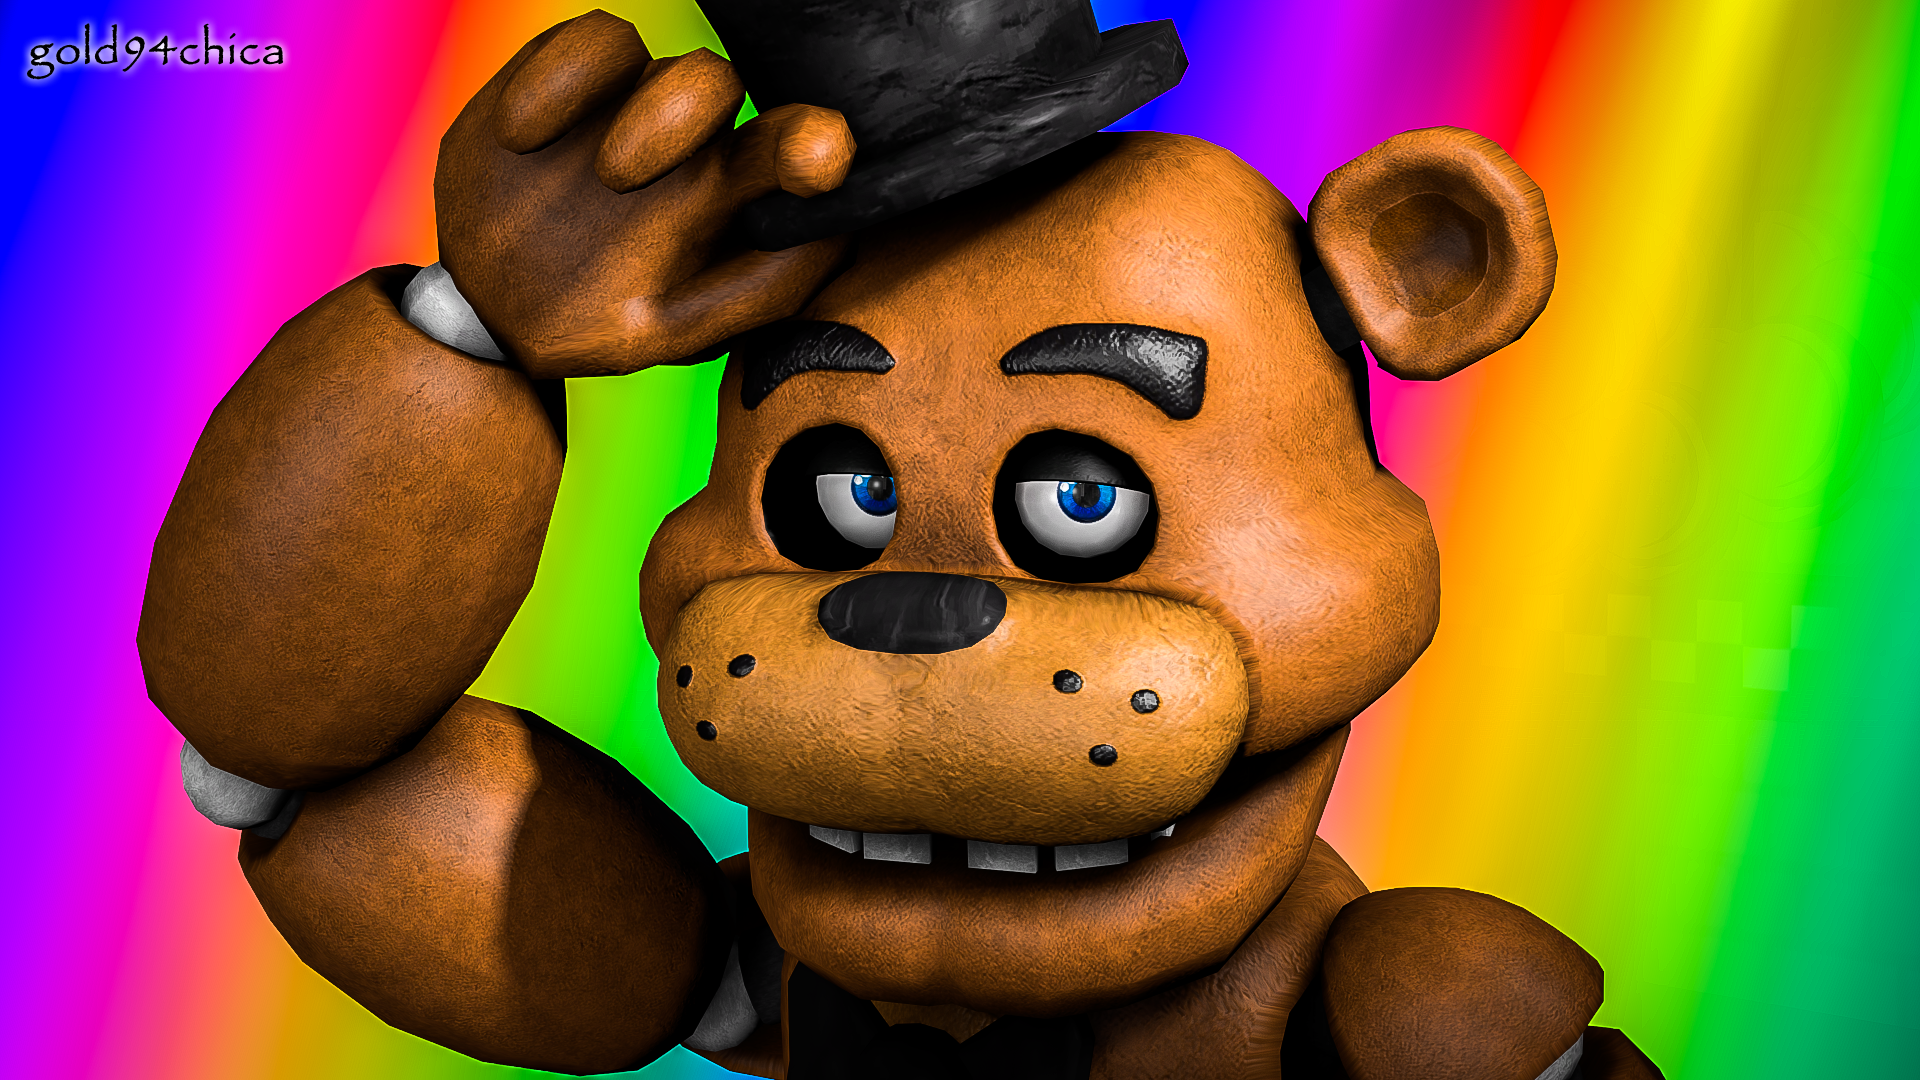 lady Freddy SFM Wallpaper by gold94chica on